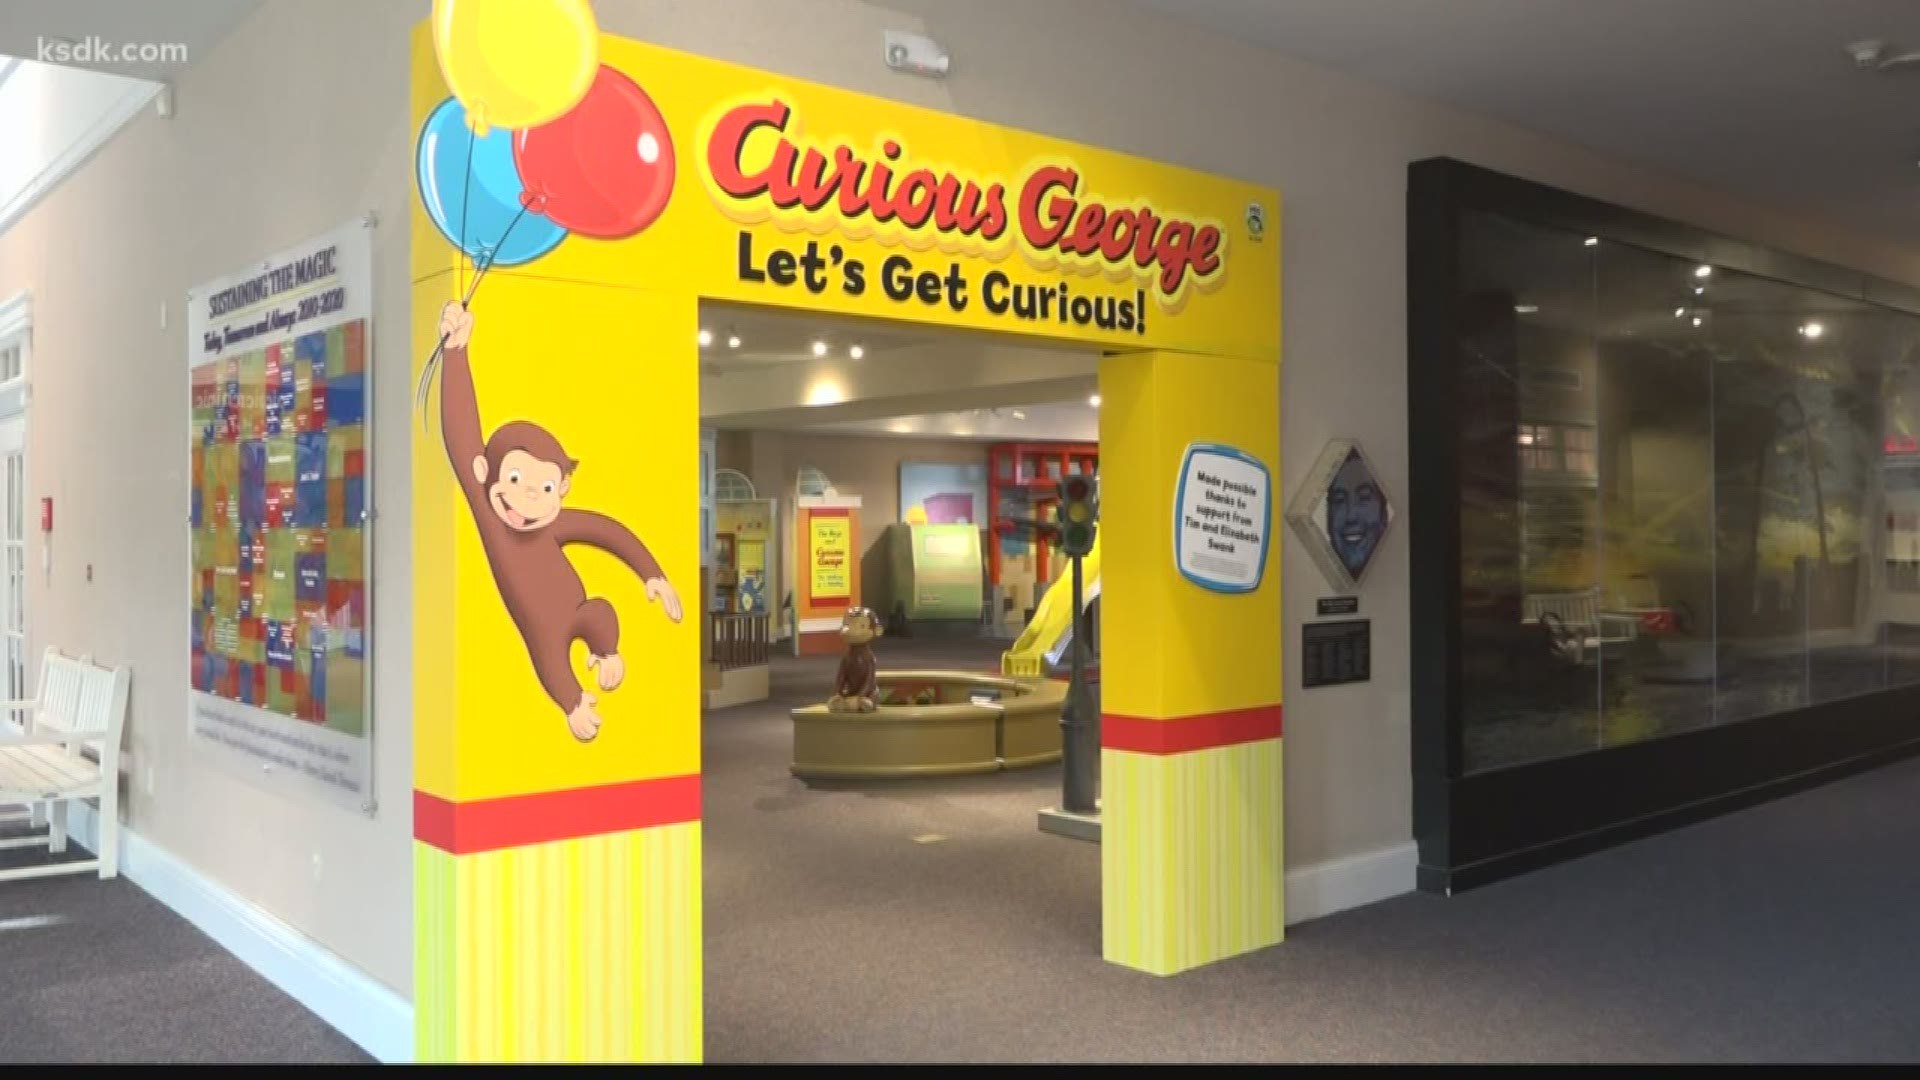 Curious George: Let’s Get Curious! is open now through April 19, 2020. For more information, visit magichouse.org.